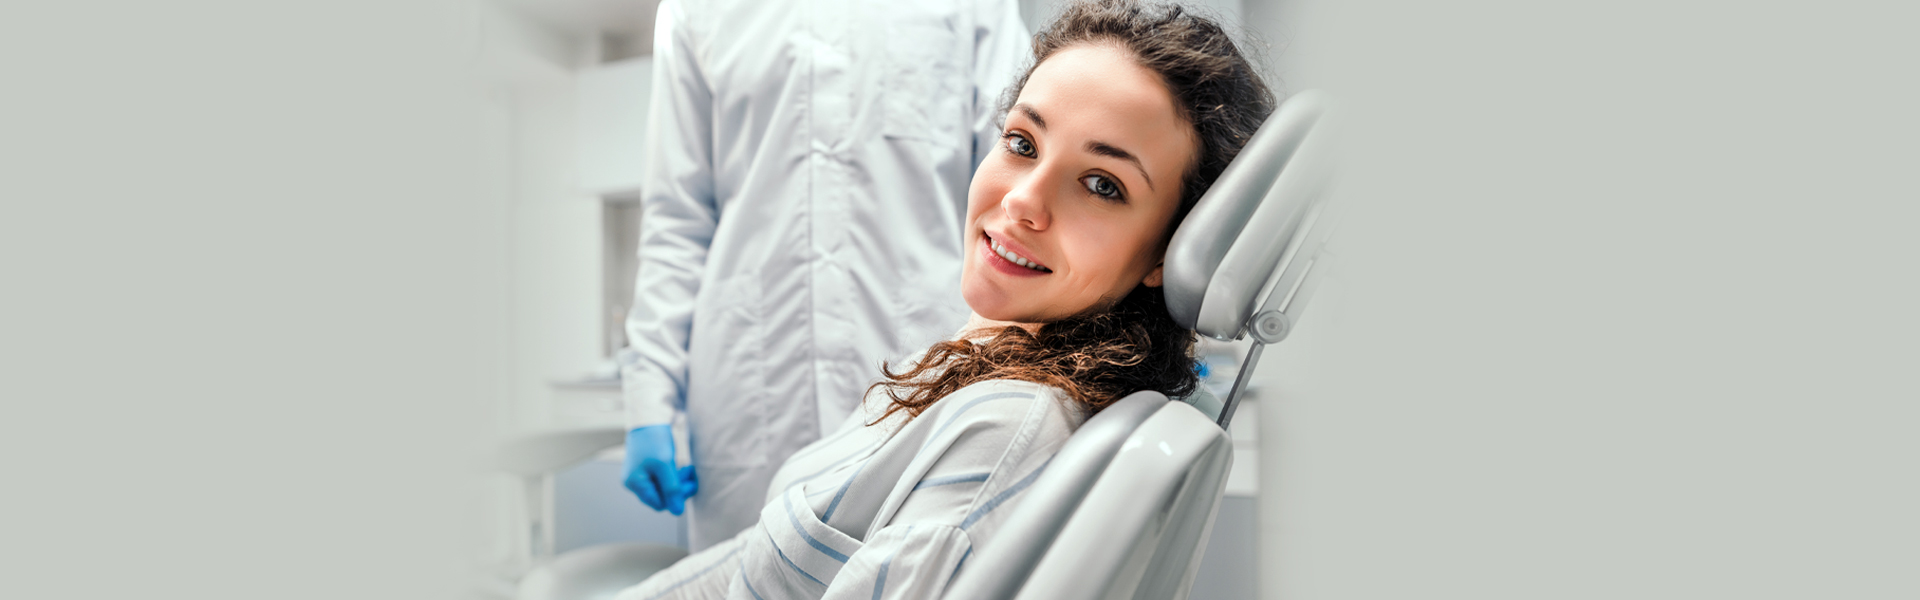 Quick and Easy Dental Appointment Scheduling: It's Possible